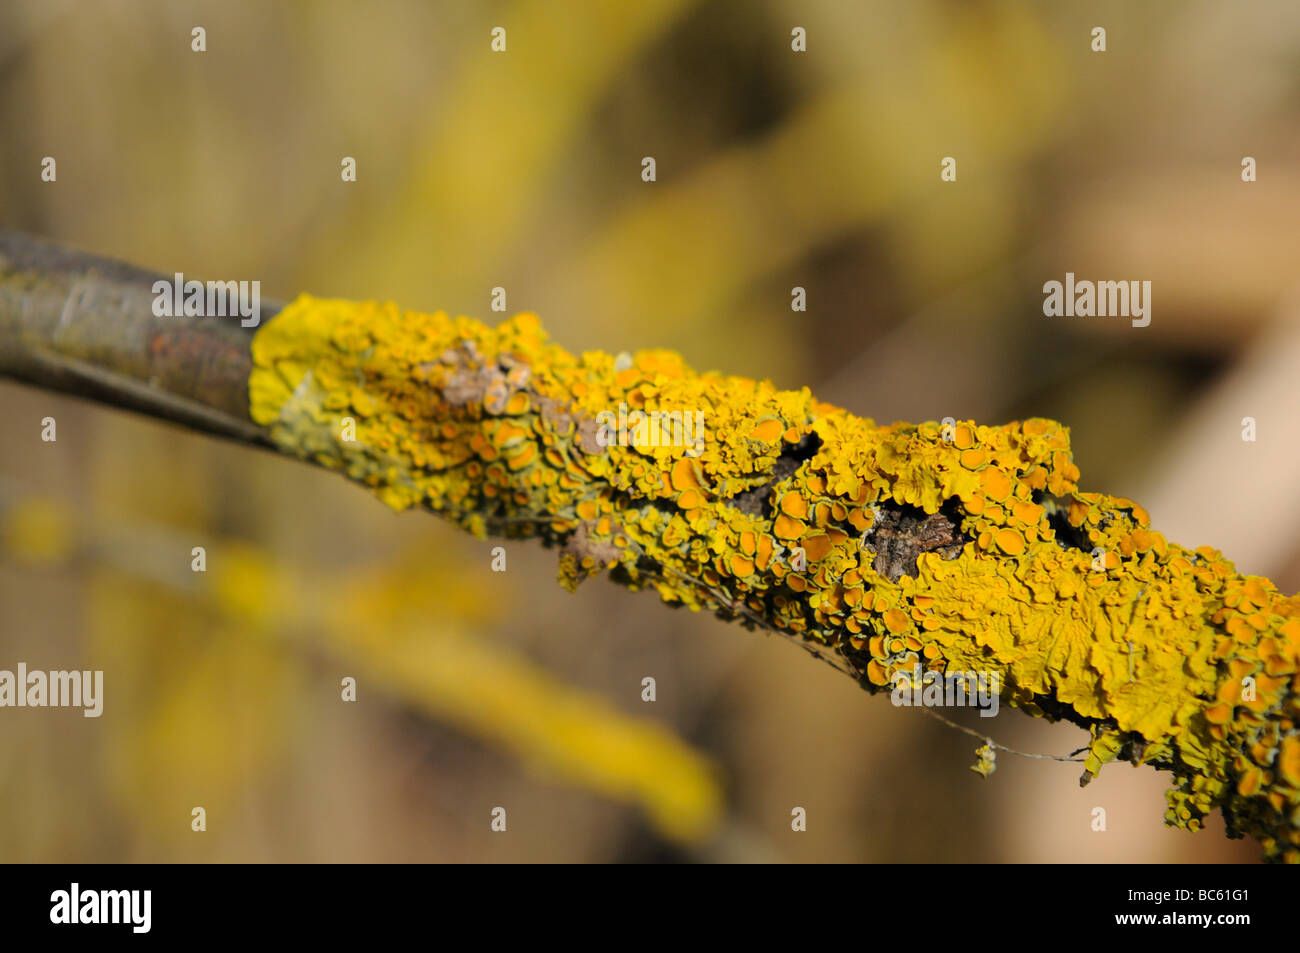 Close-up of lichen on branch, Bavaria, Germany Stock Photo